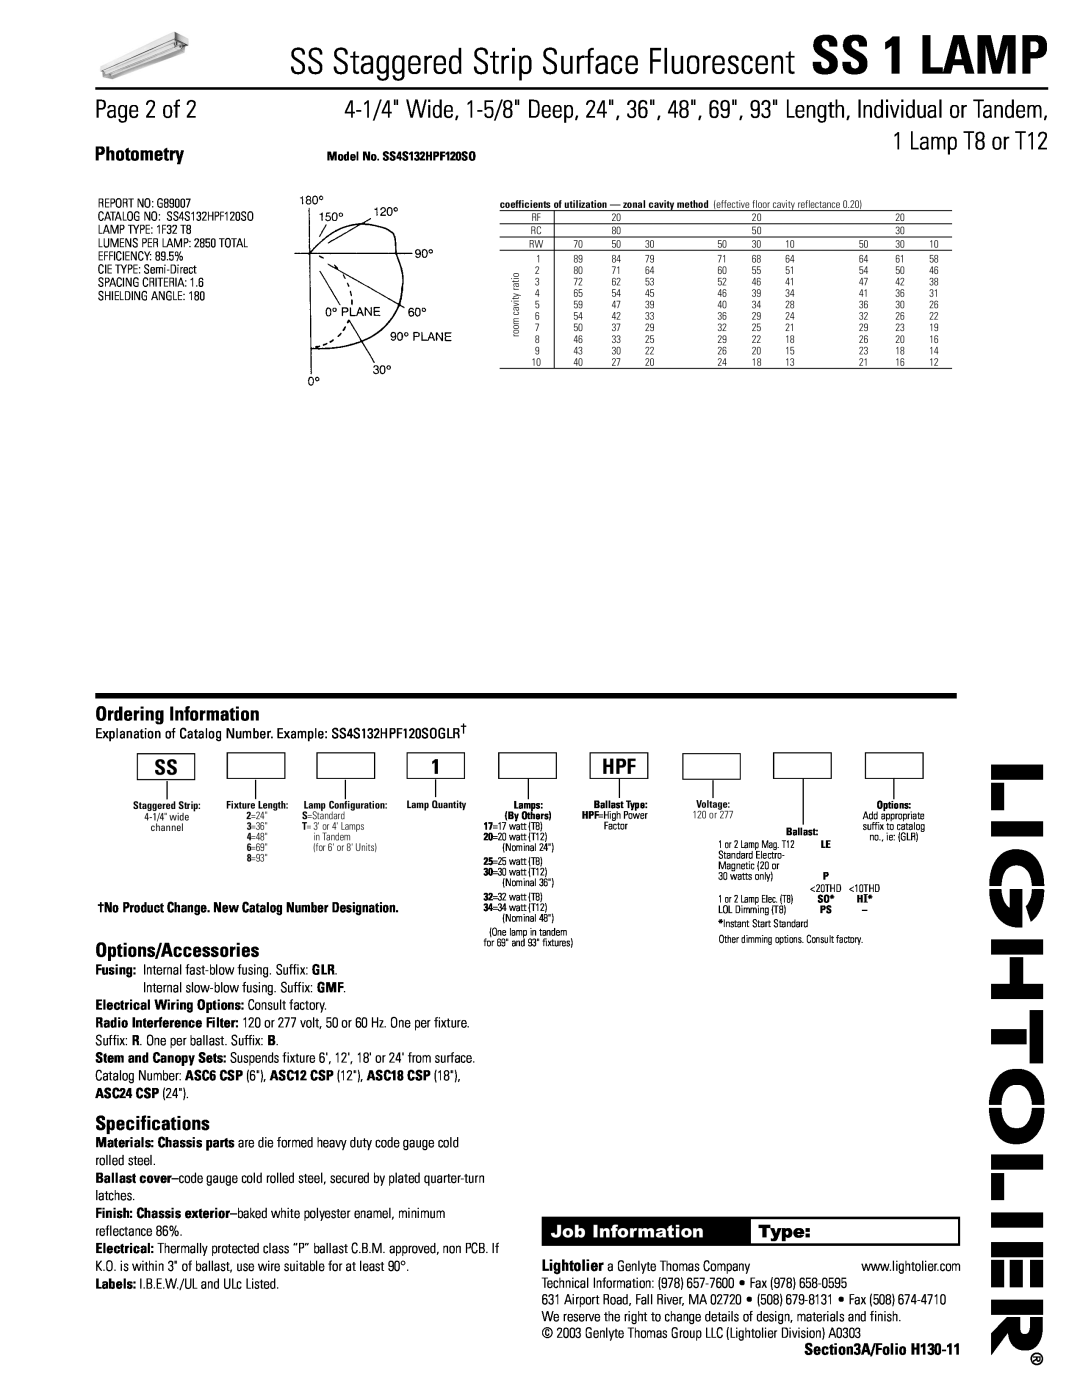 Lightolier SS 1 LAMP Page 2 of, Photometry, Ordering Information, Options/Accessories, Specifications, A/Folio H130-11 